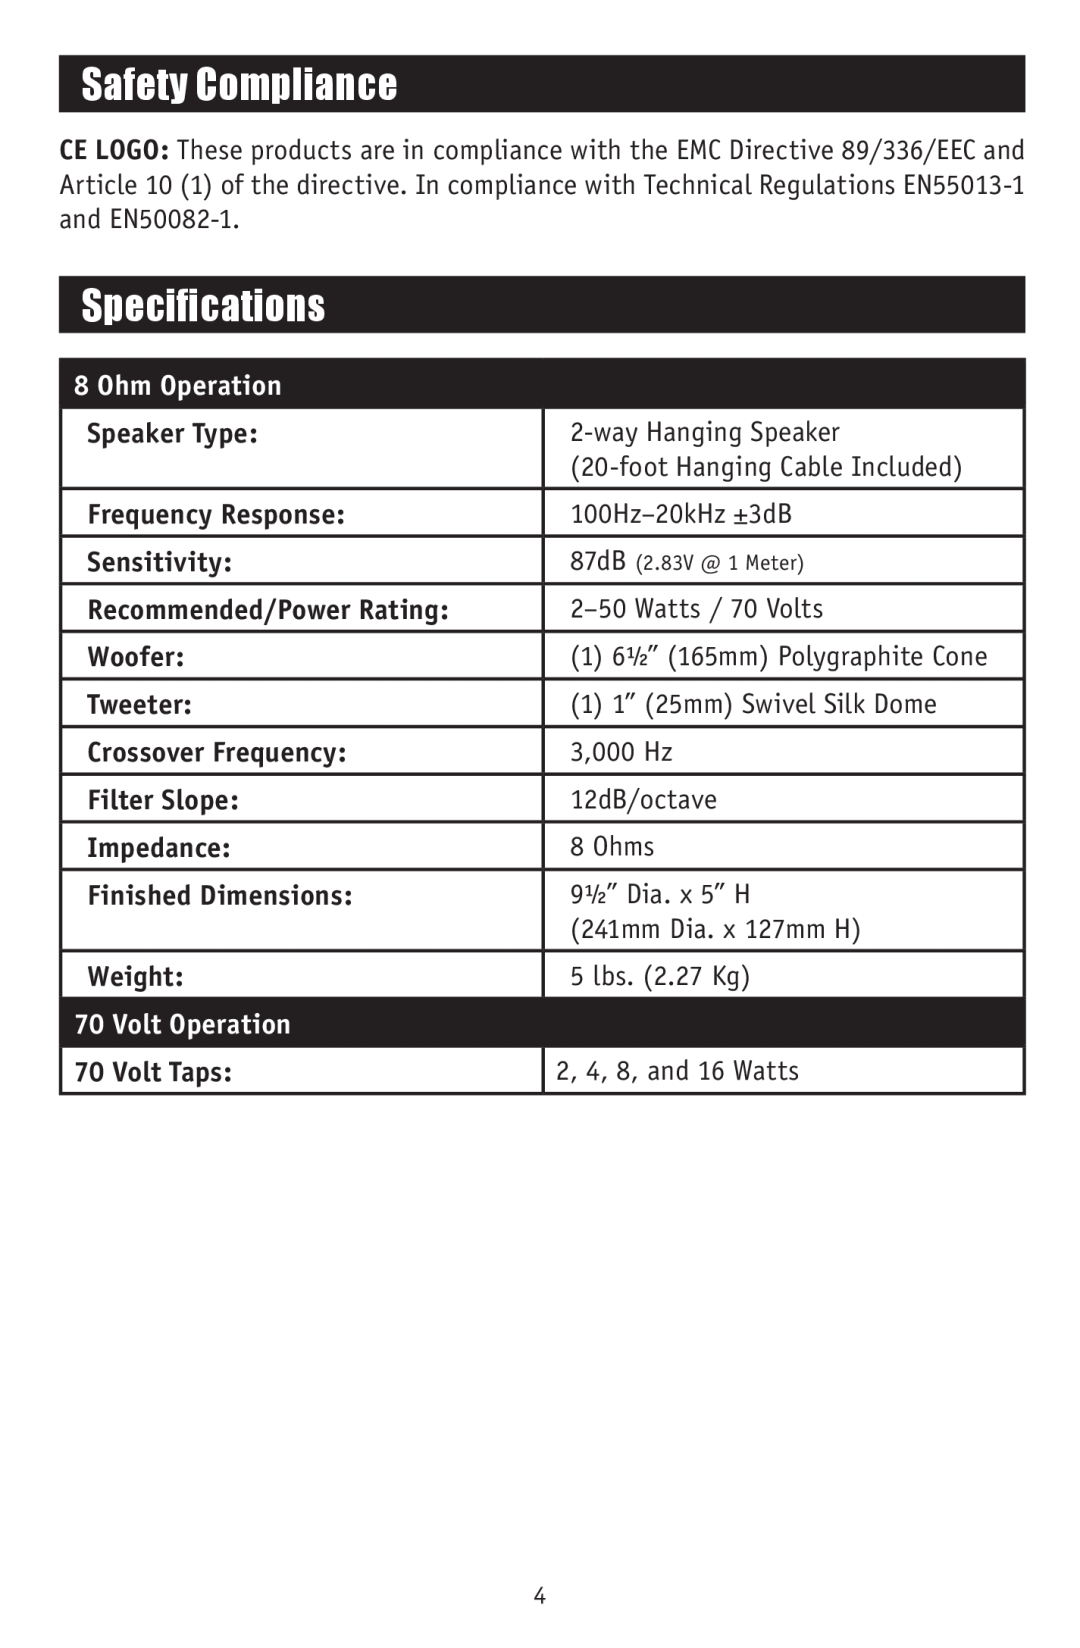 RBH Sound HS-615 owner manual Safety Compliance, Specifications, Ohm Operation, Volt Operation 